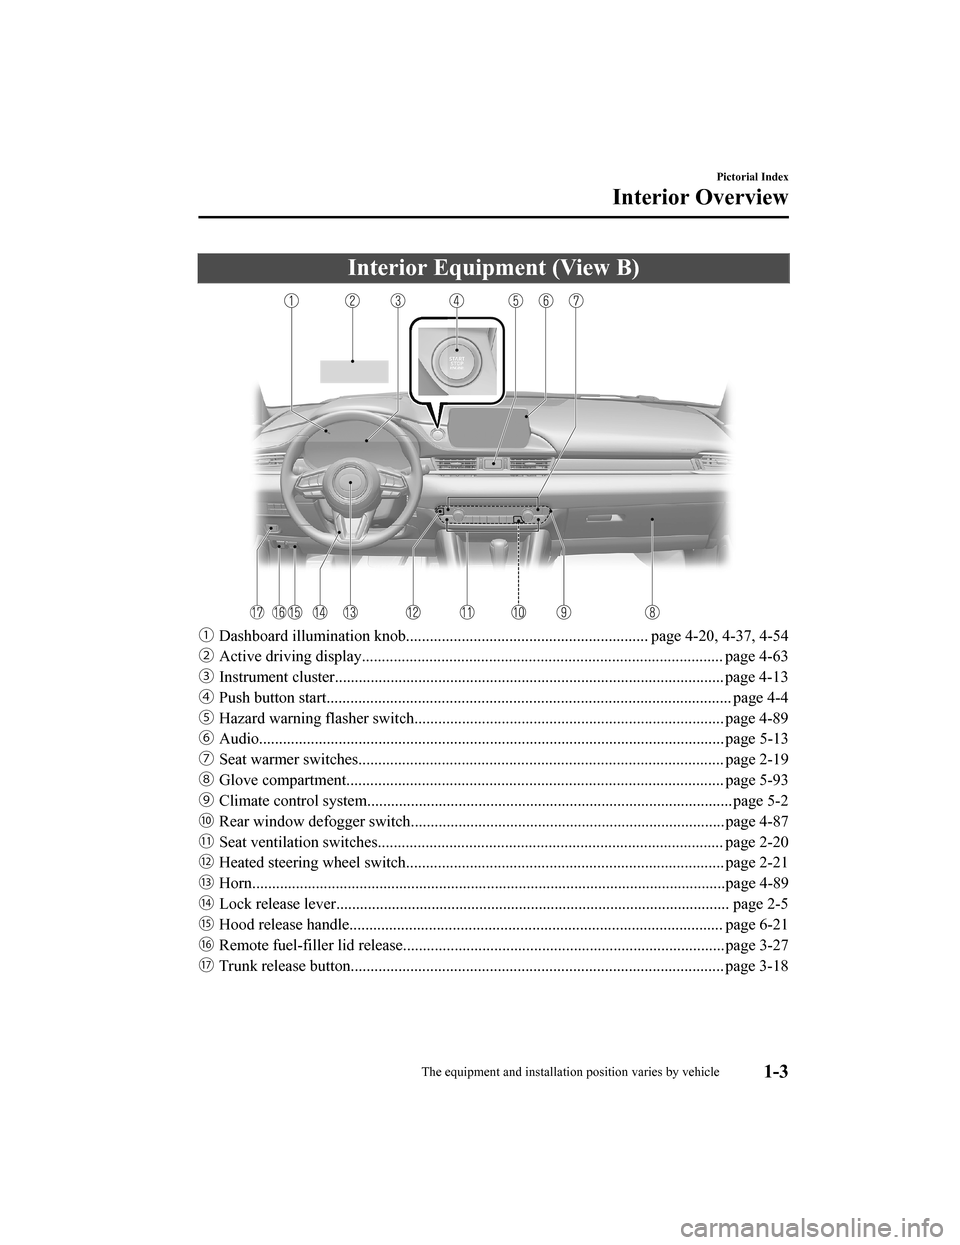 MAZDA MODEL 6 2020  Owners Manual (in English) Interior Equipment (View B)
ƒDashboard illumination knob............................................................. page 4-20, 4-37, 4-54
„ Active driving display...............................